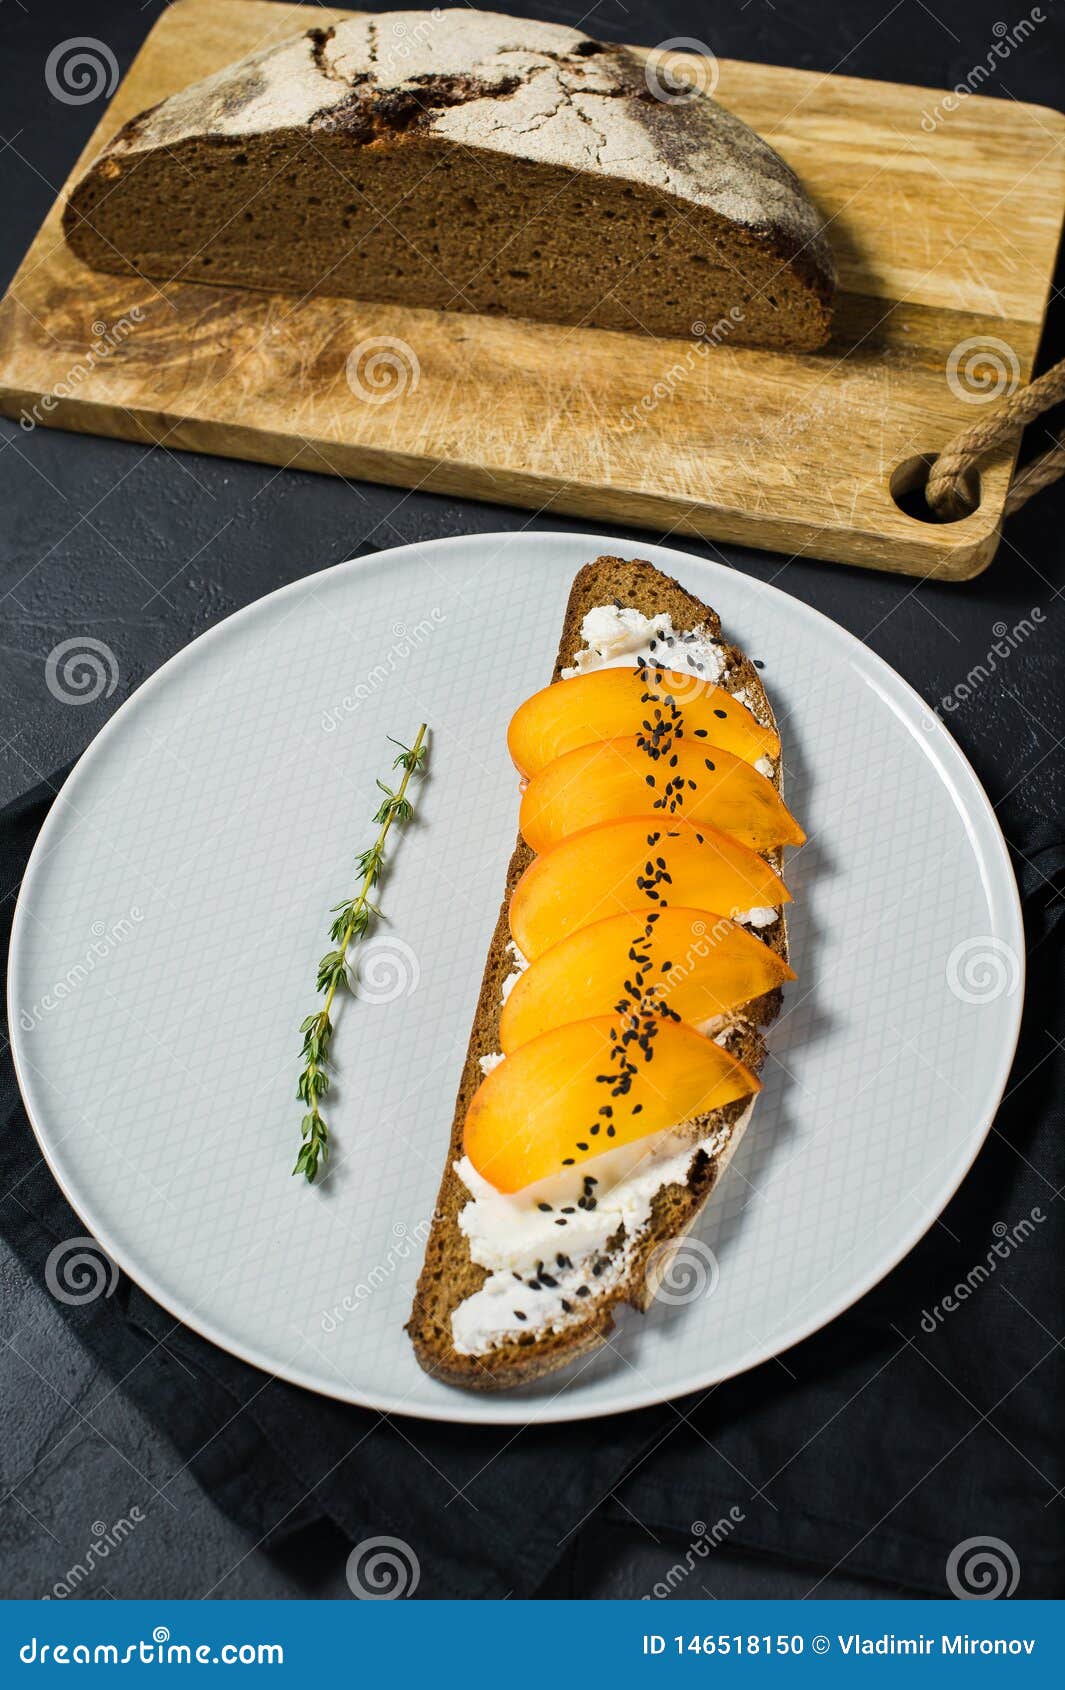 Sandwich With Persimmon And Soft Cheese On A Black ...